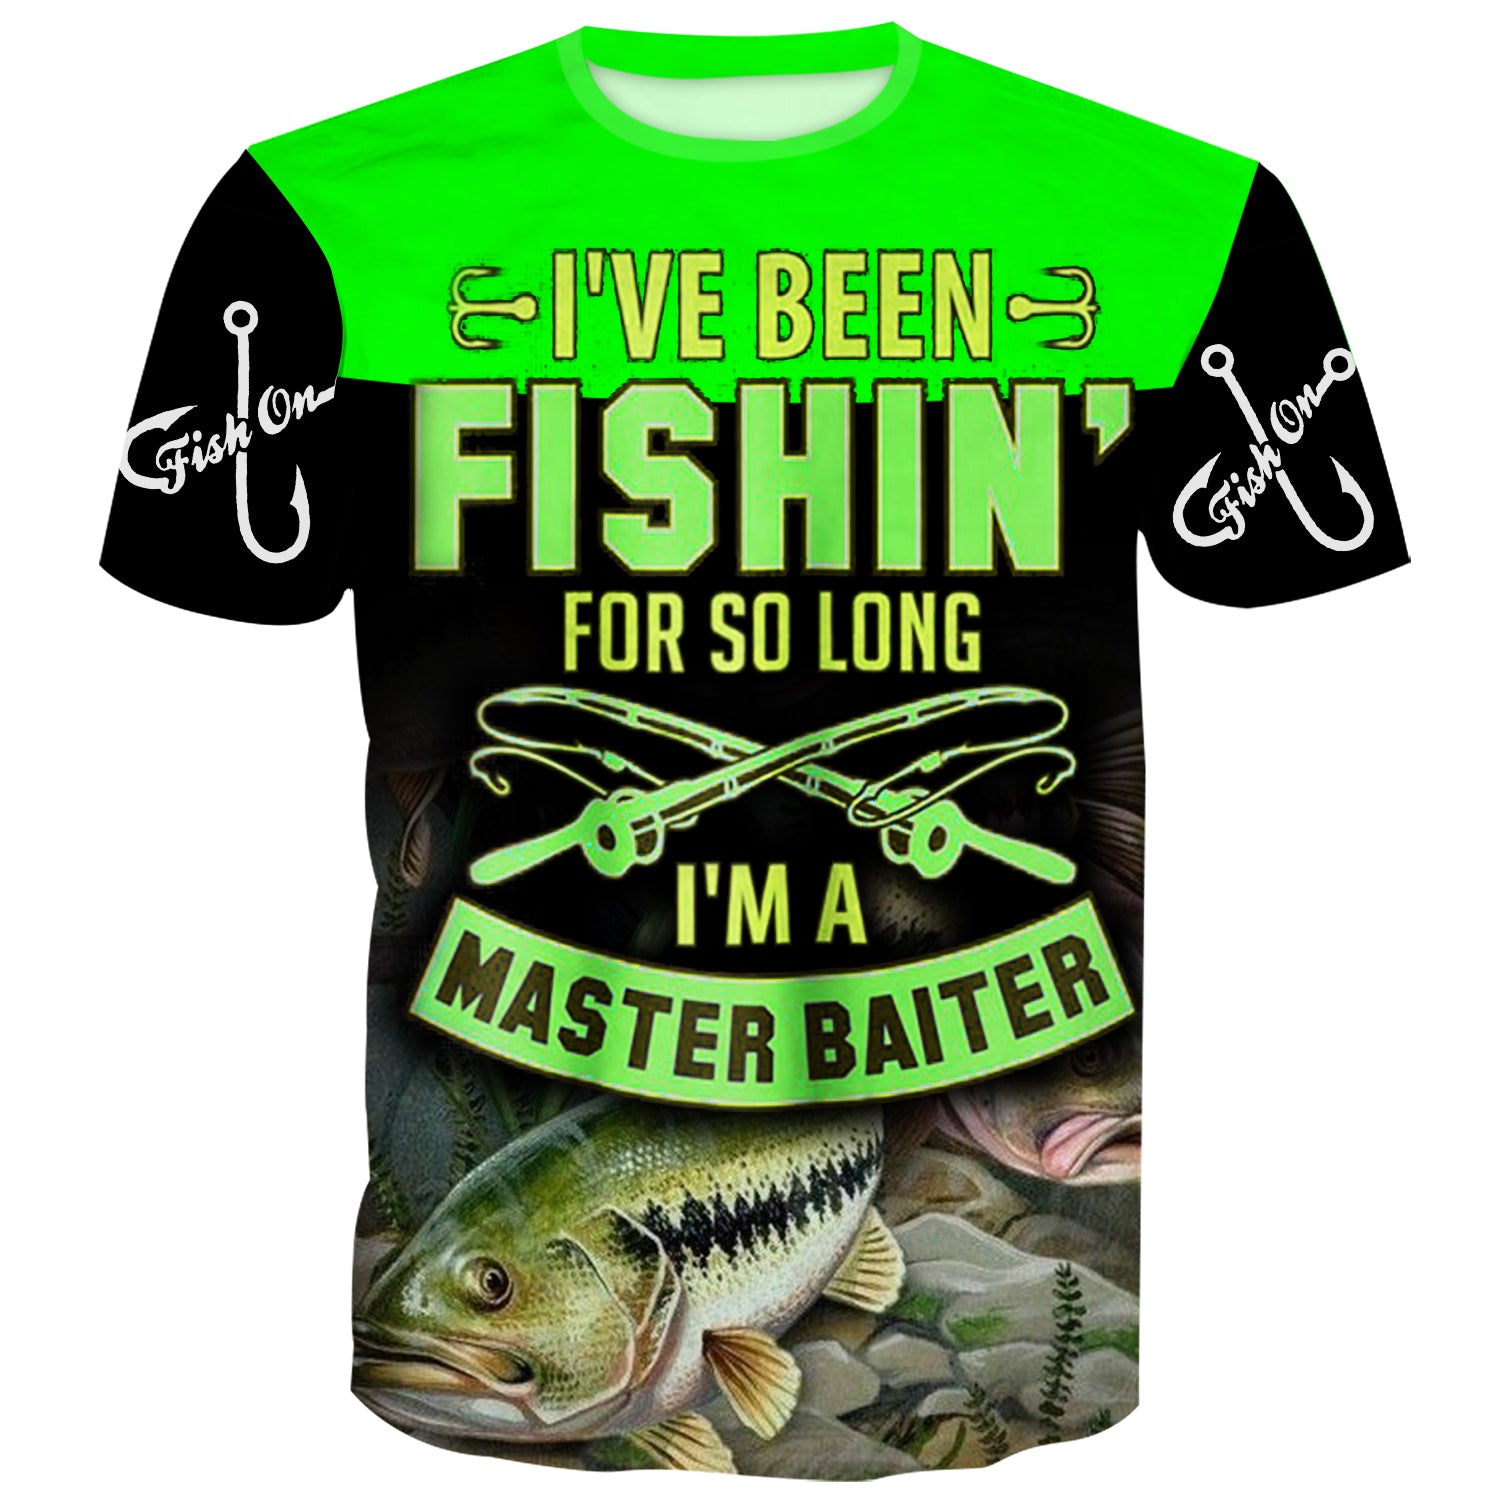 I'm not a trophy wife  Funny fishing tshirt for women - elitefishingoutlet